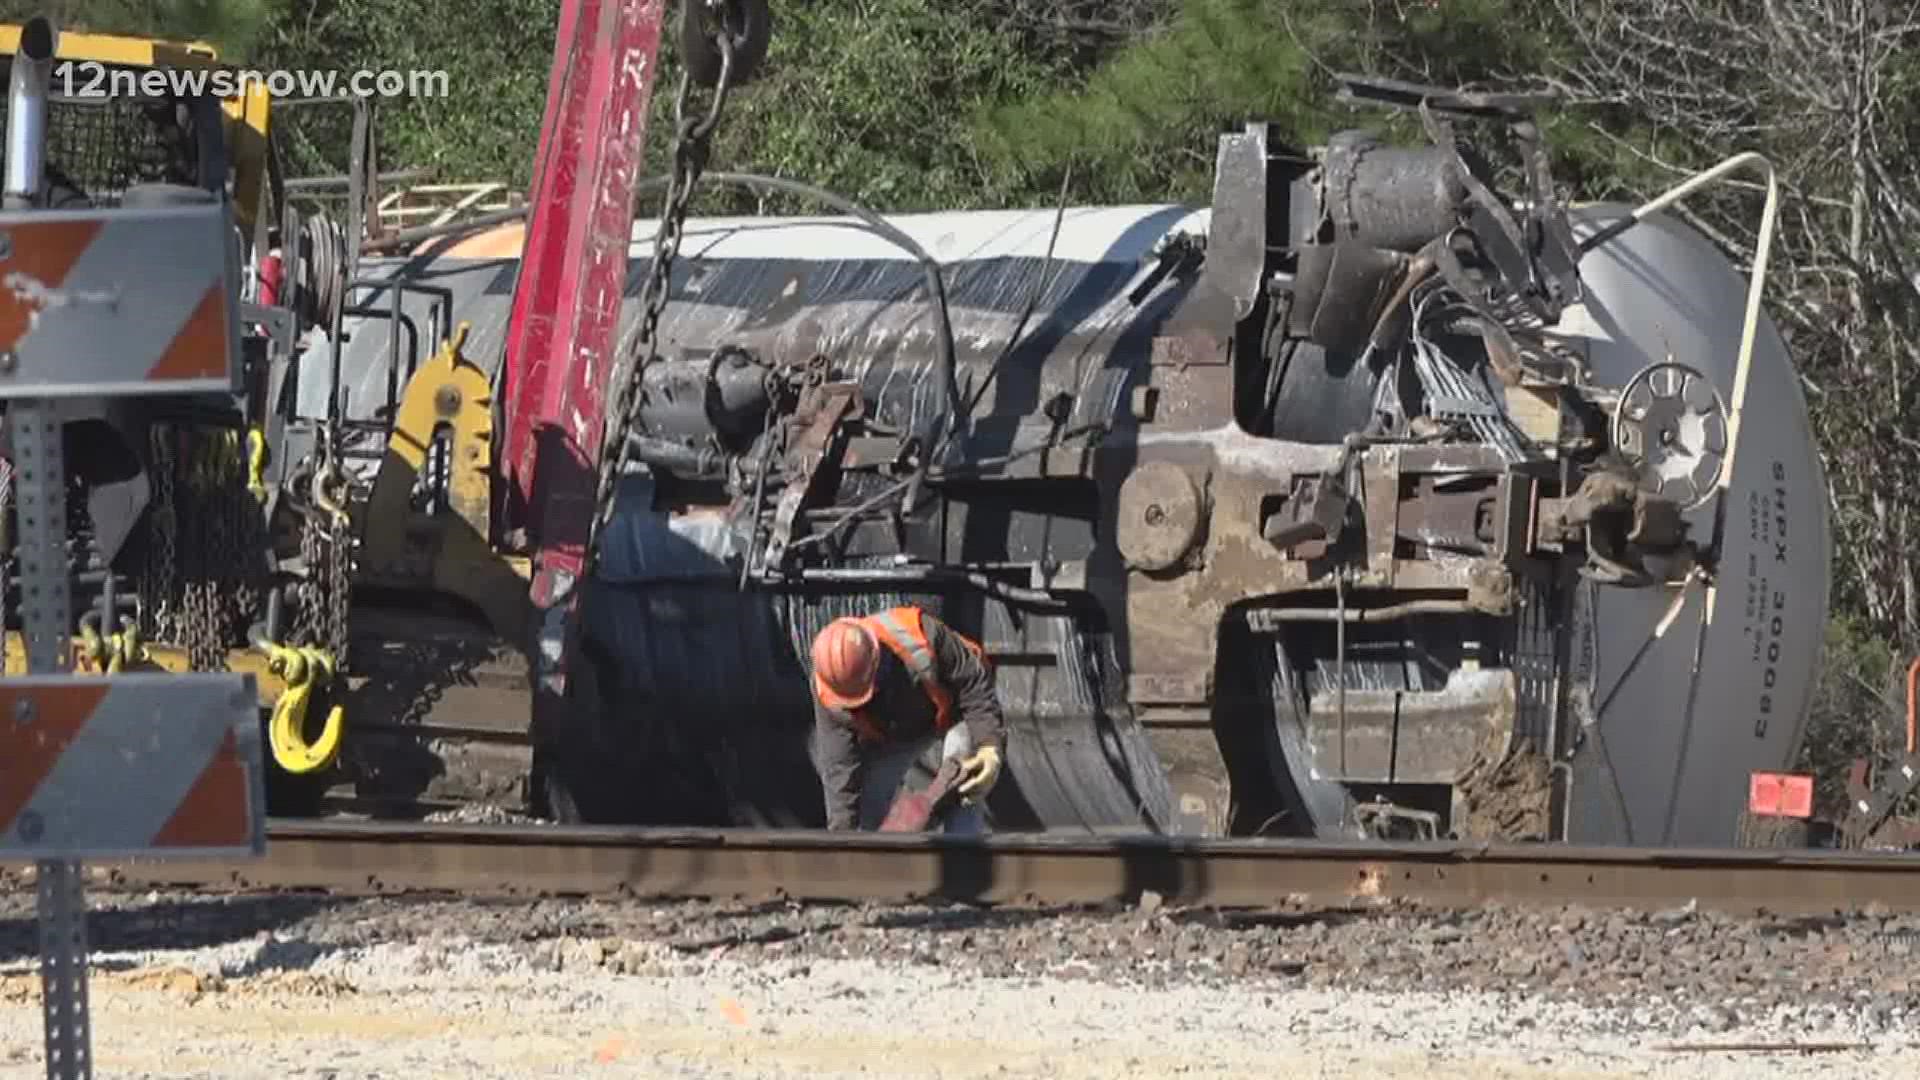 BNSF officials said that on early Sunday morning, there was a derailment of nine mixed freight cars in their Silsbee yard.